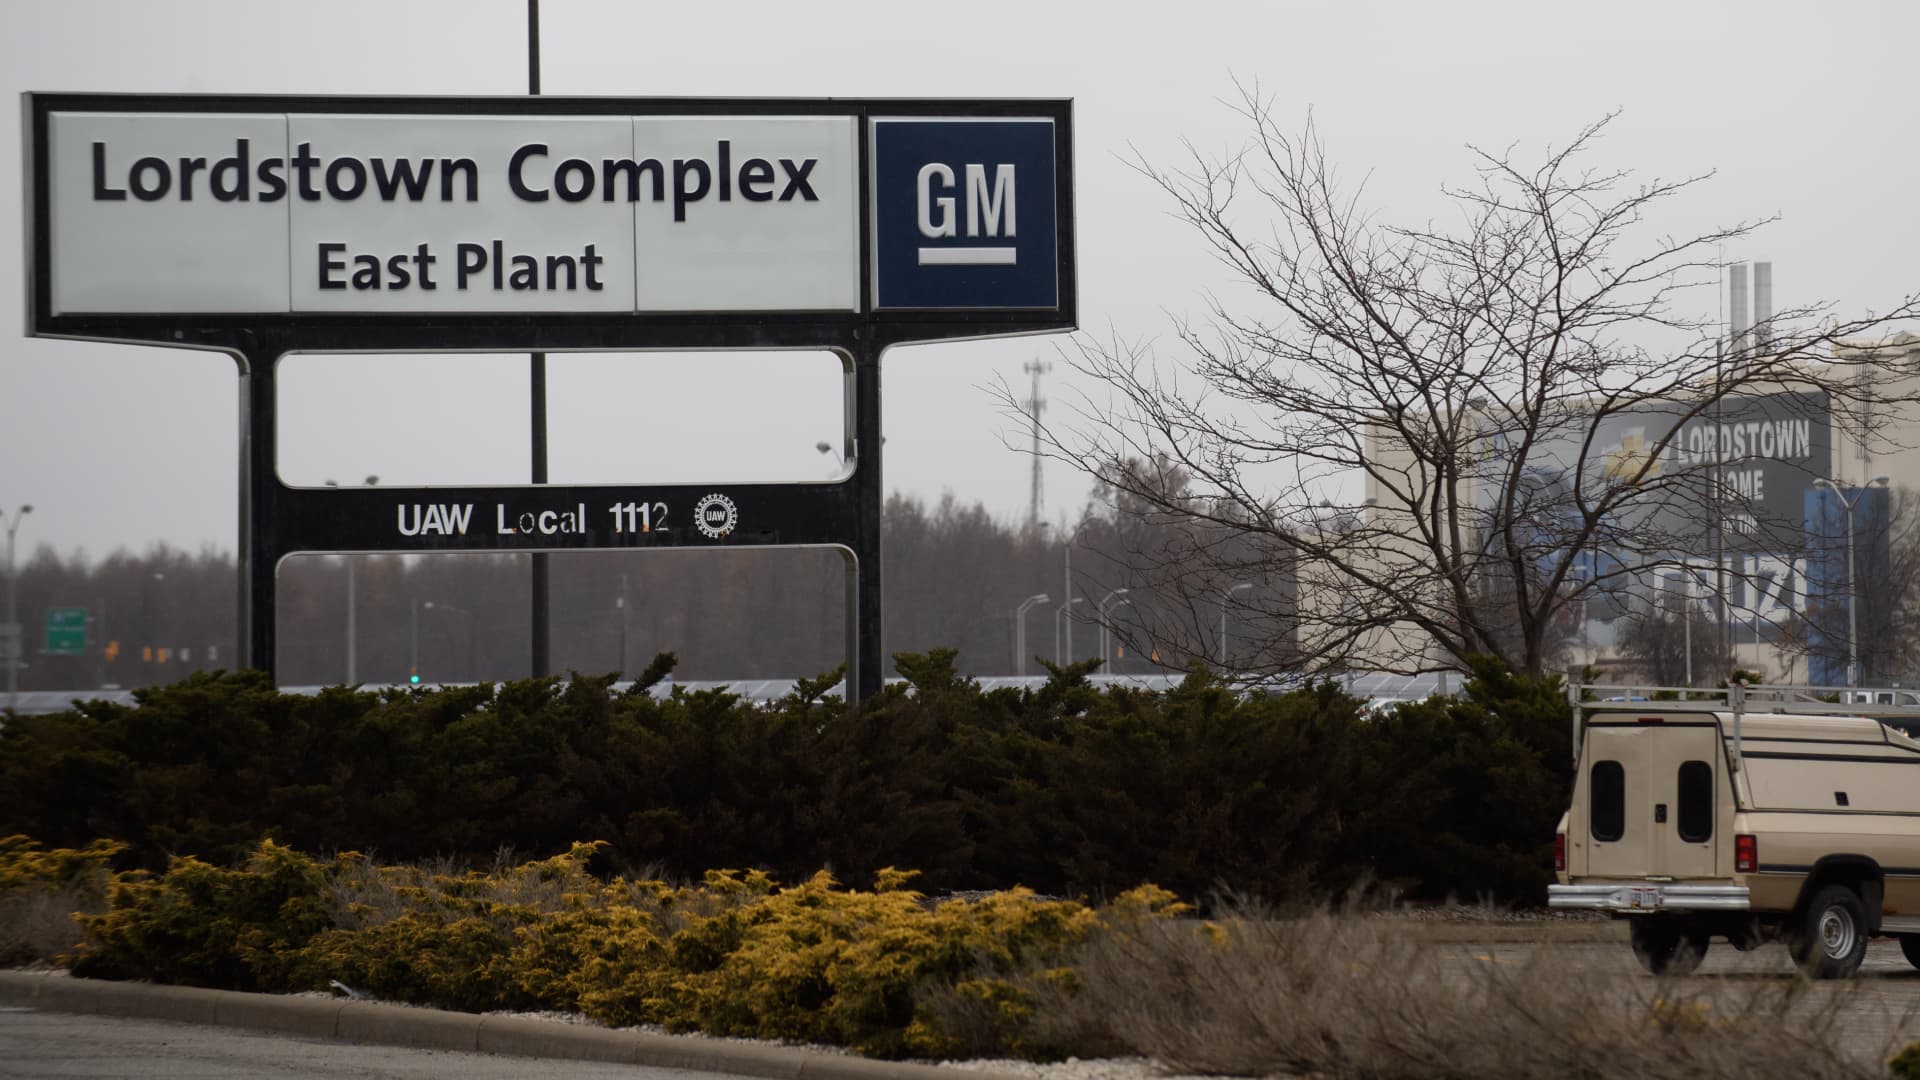 An exterior view of the GM Lordstown Plant on November 26, 2018 in Lordstown, Ohio.